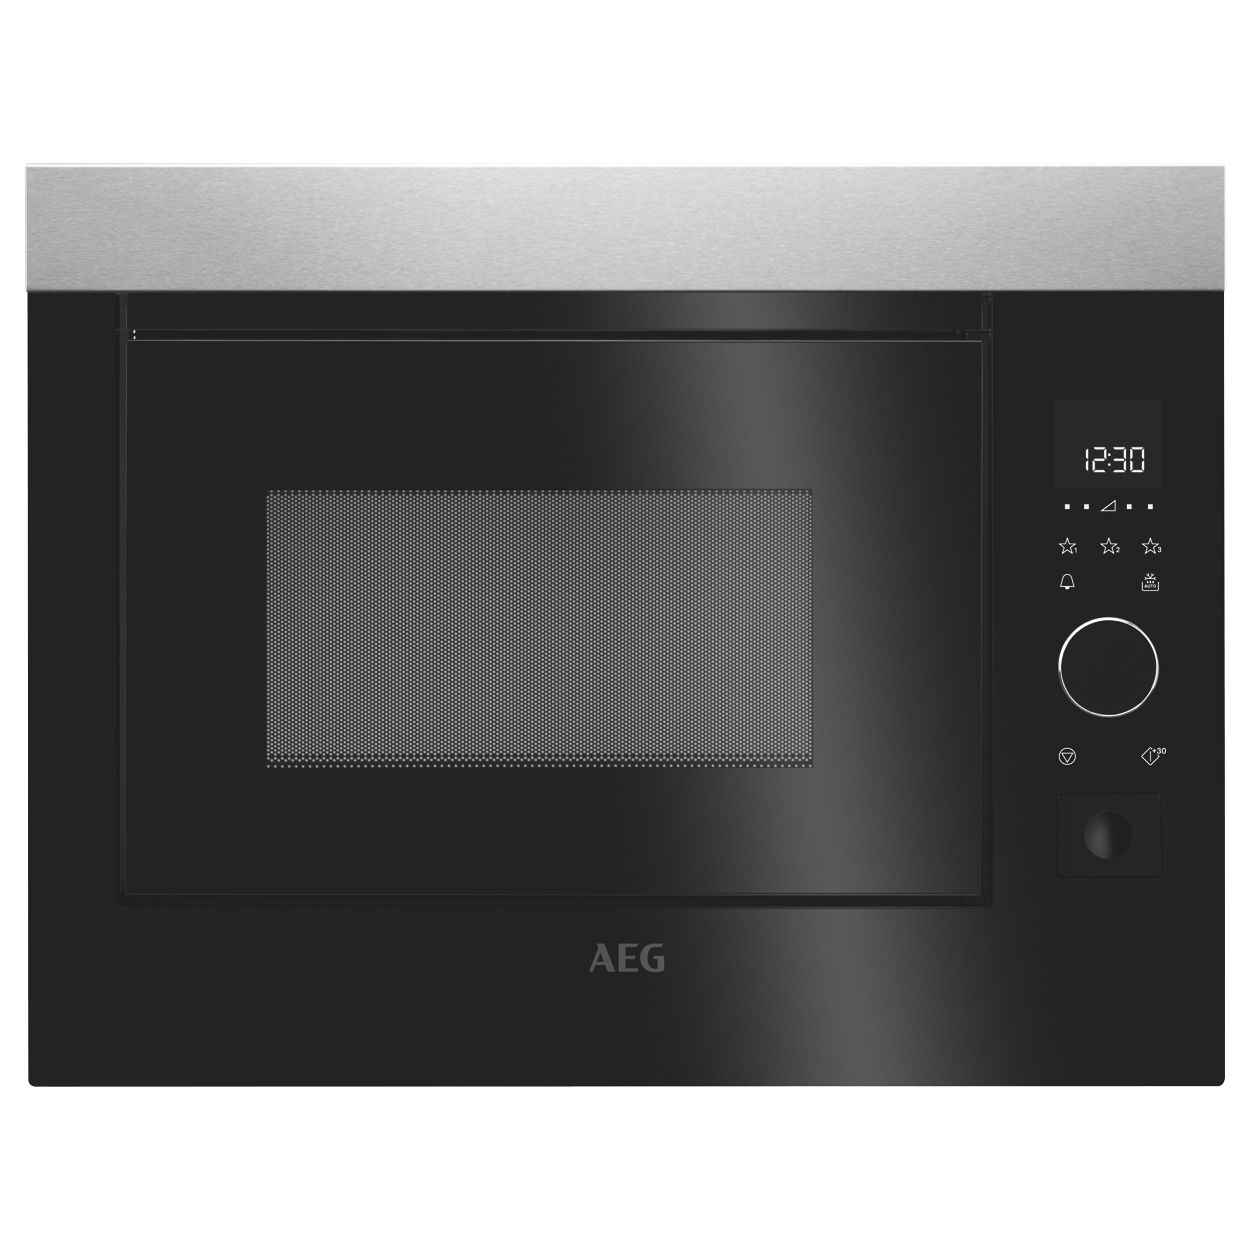 AEG MBE2658S-M Solo Microwave, Black/Stainless Steel